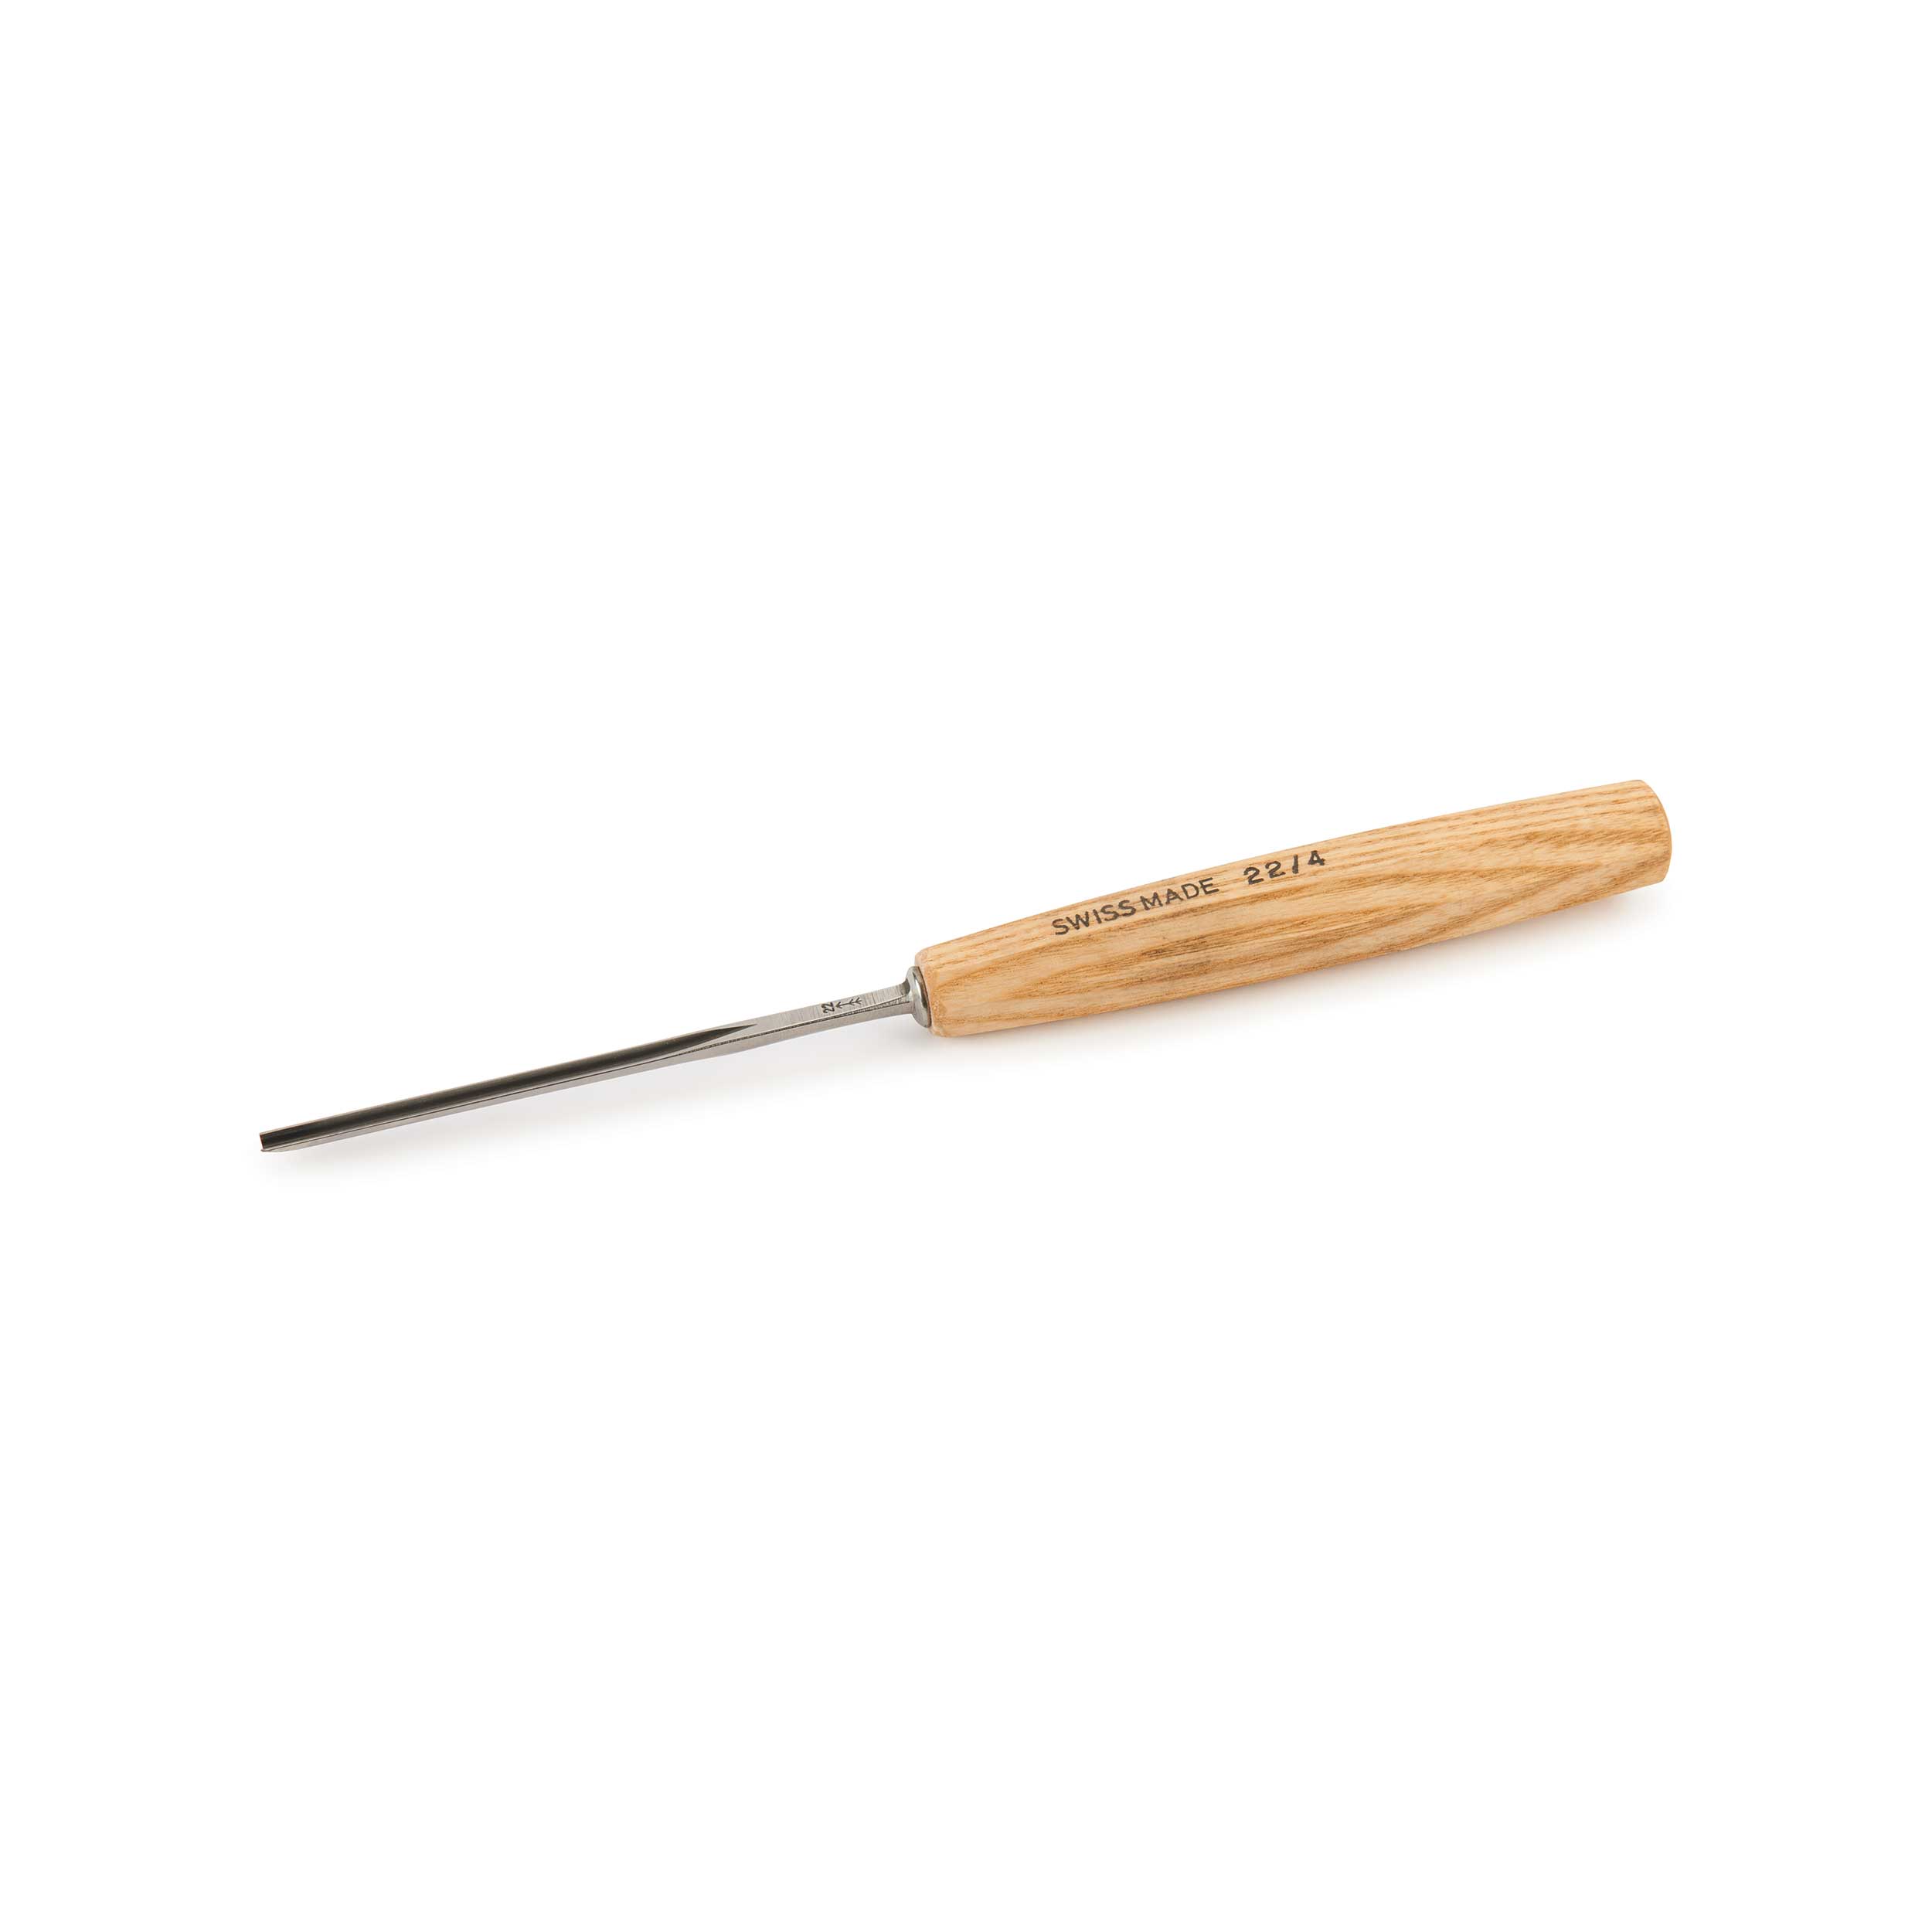 #22 Sweep V-parting Tool, 4 Mm, Full Size